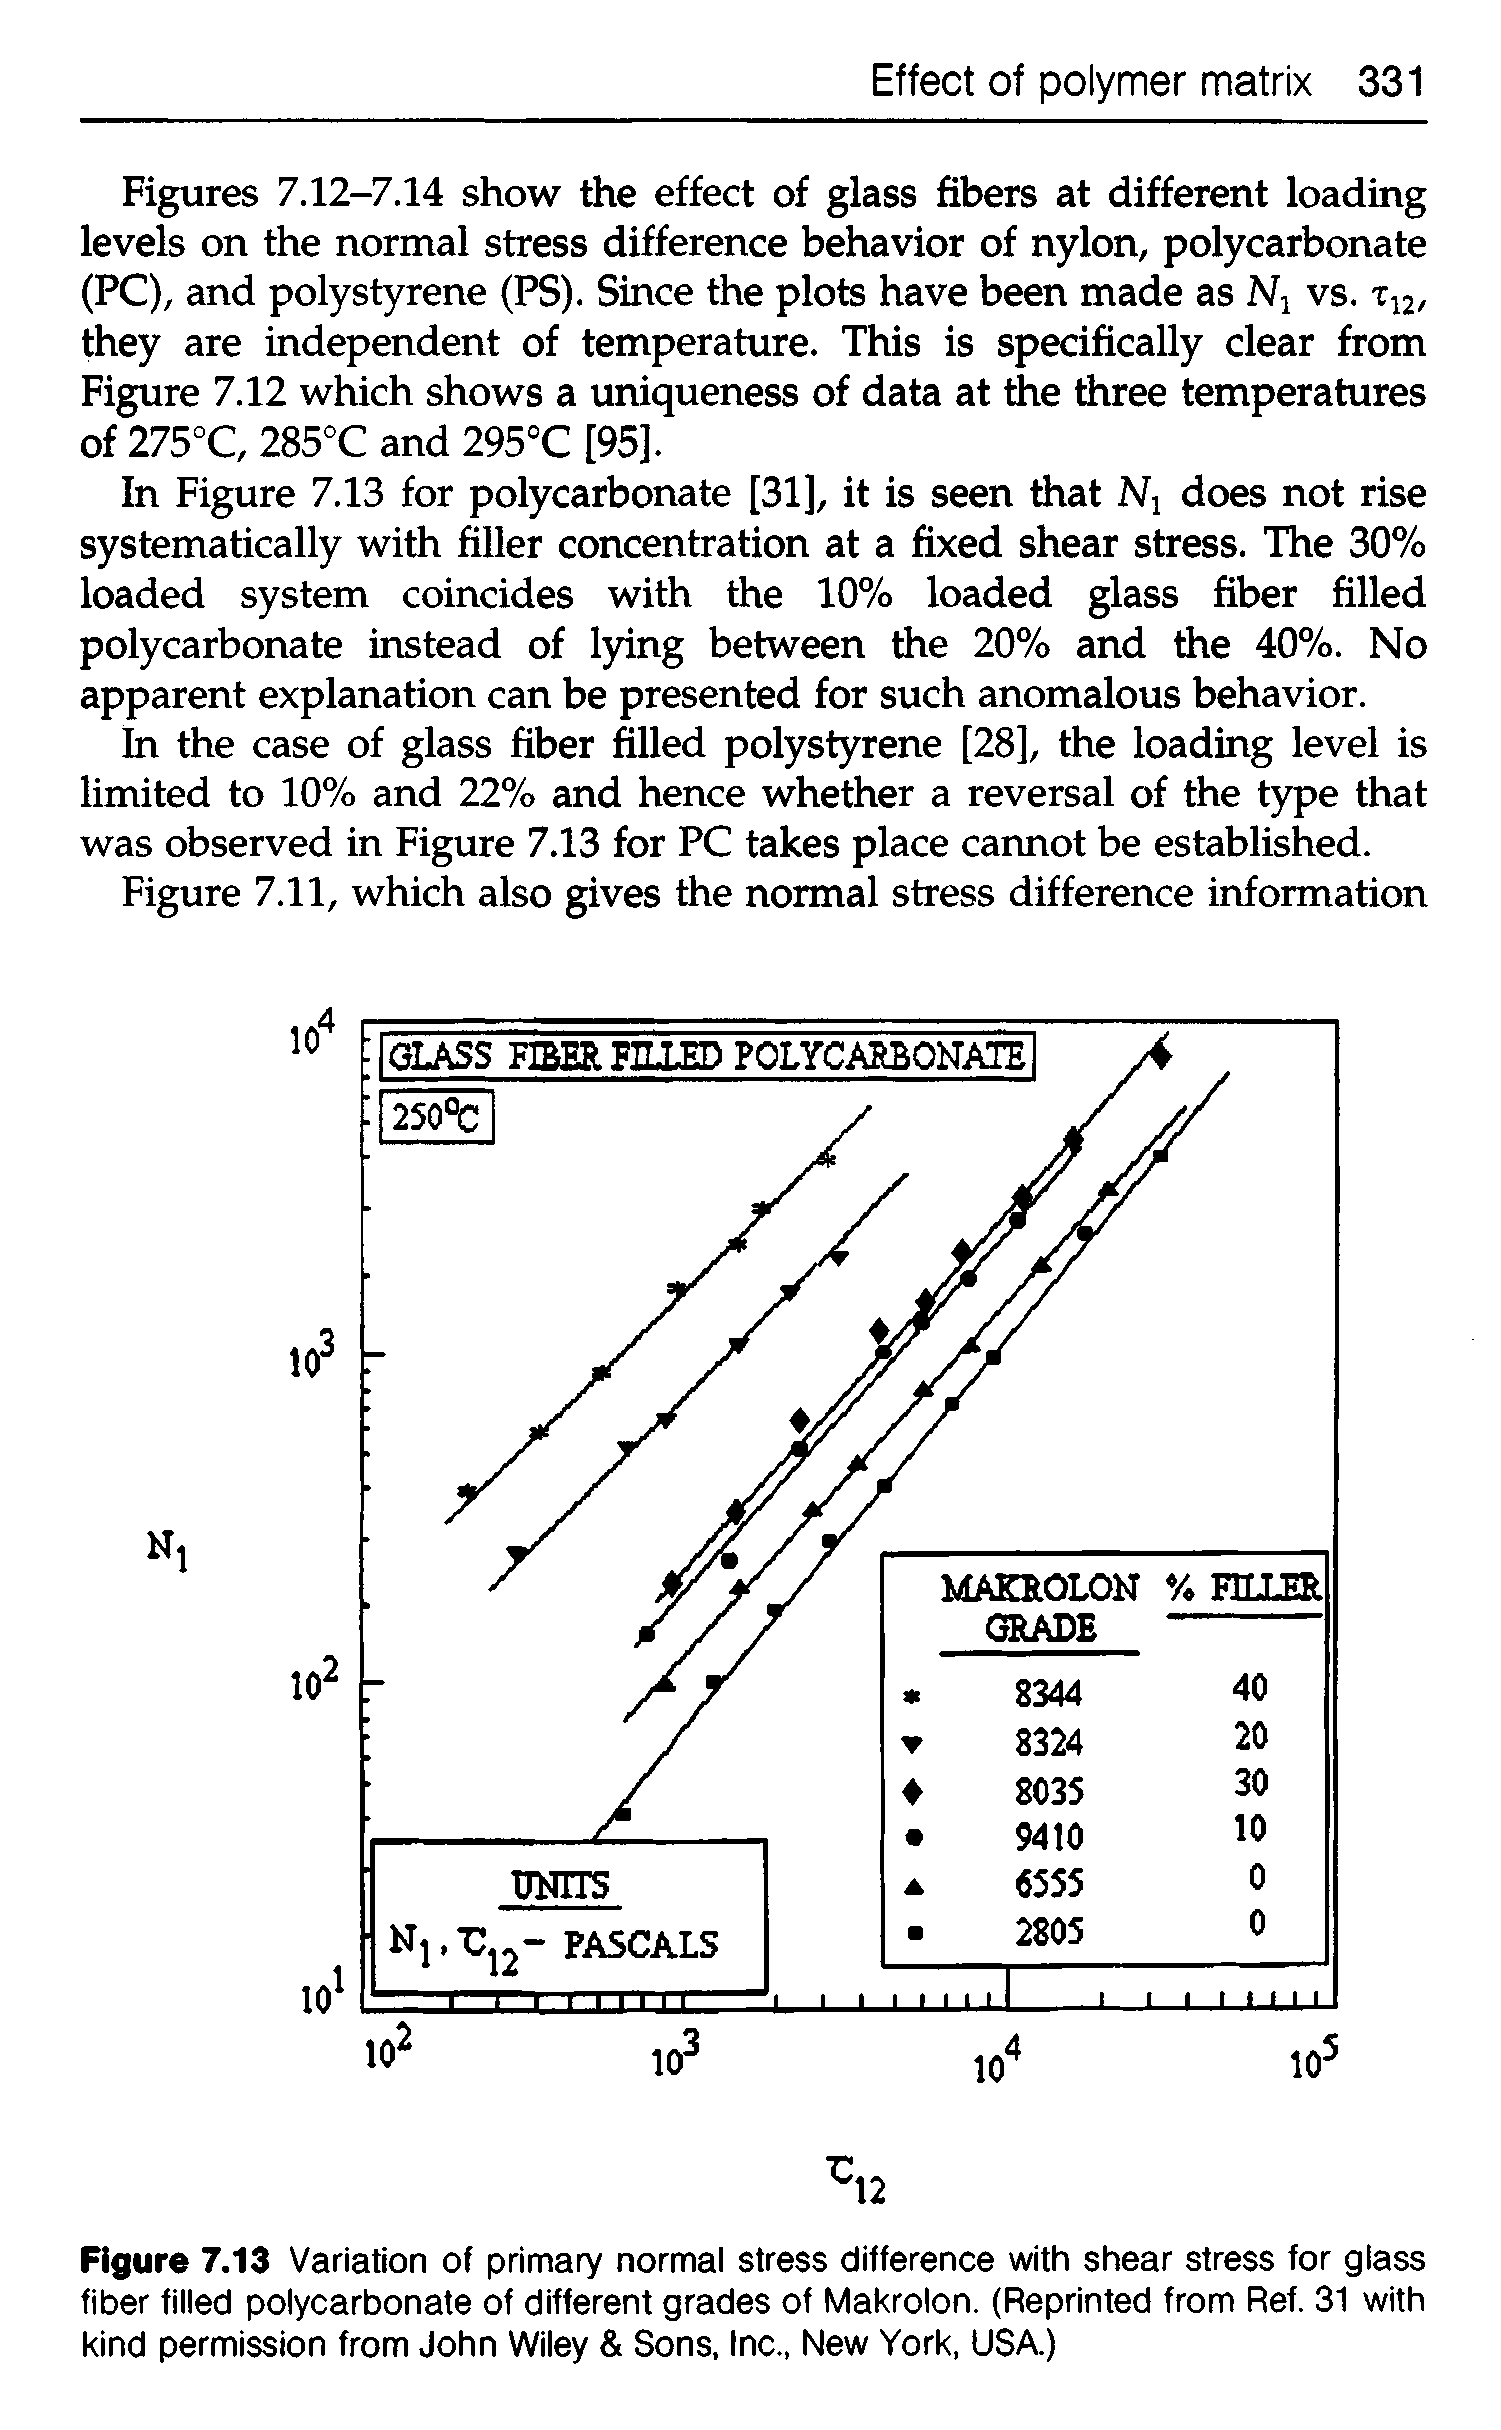 Figures 7.12-7.14 show the effect of glass fibers at different loading levels on the normal stress difference behavior of nylon, polycarbonate (PC), and polyst)n-ene (PS). Since the plots have been made as Nj vs. they are independent of temperature. This is specifically clear from Figure 7.12 which shows a uniqueness of data at the three temperatures of 275°C, 285°C and 295°C [95].